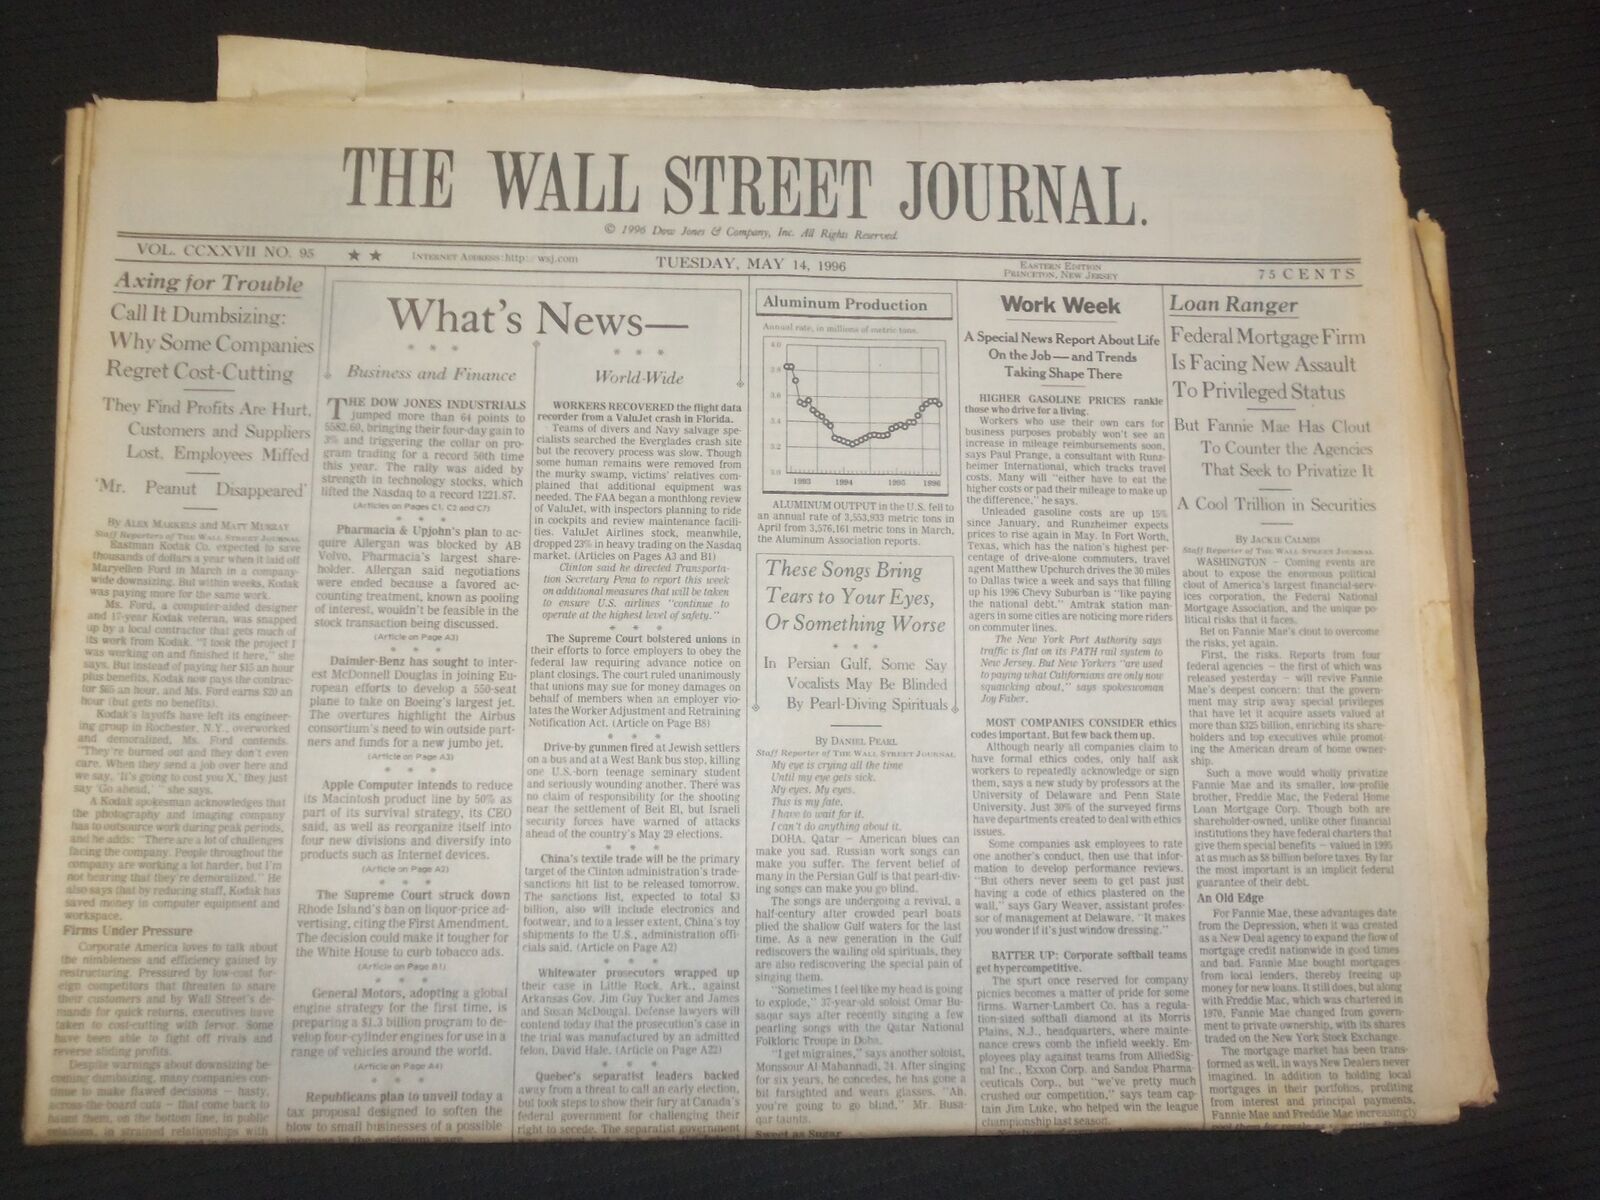 1996 MAY 14 THE WALL STREET JOURNAL - FEDERAL MORTGAGE FIRM - WJ 272